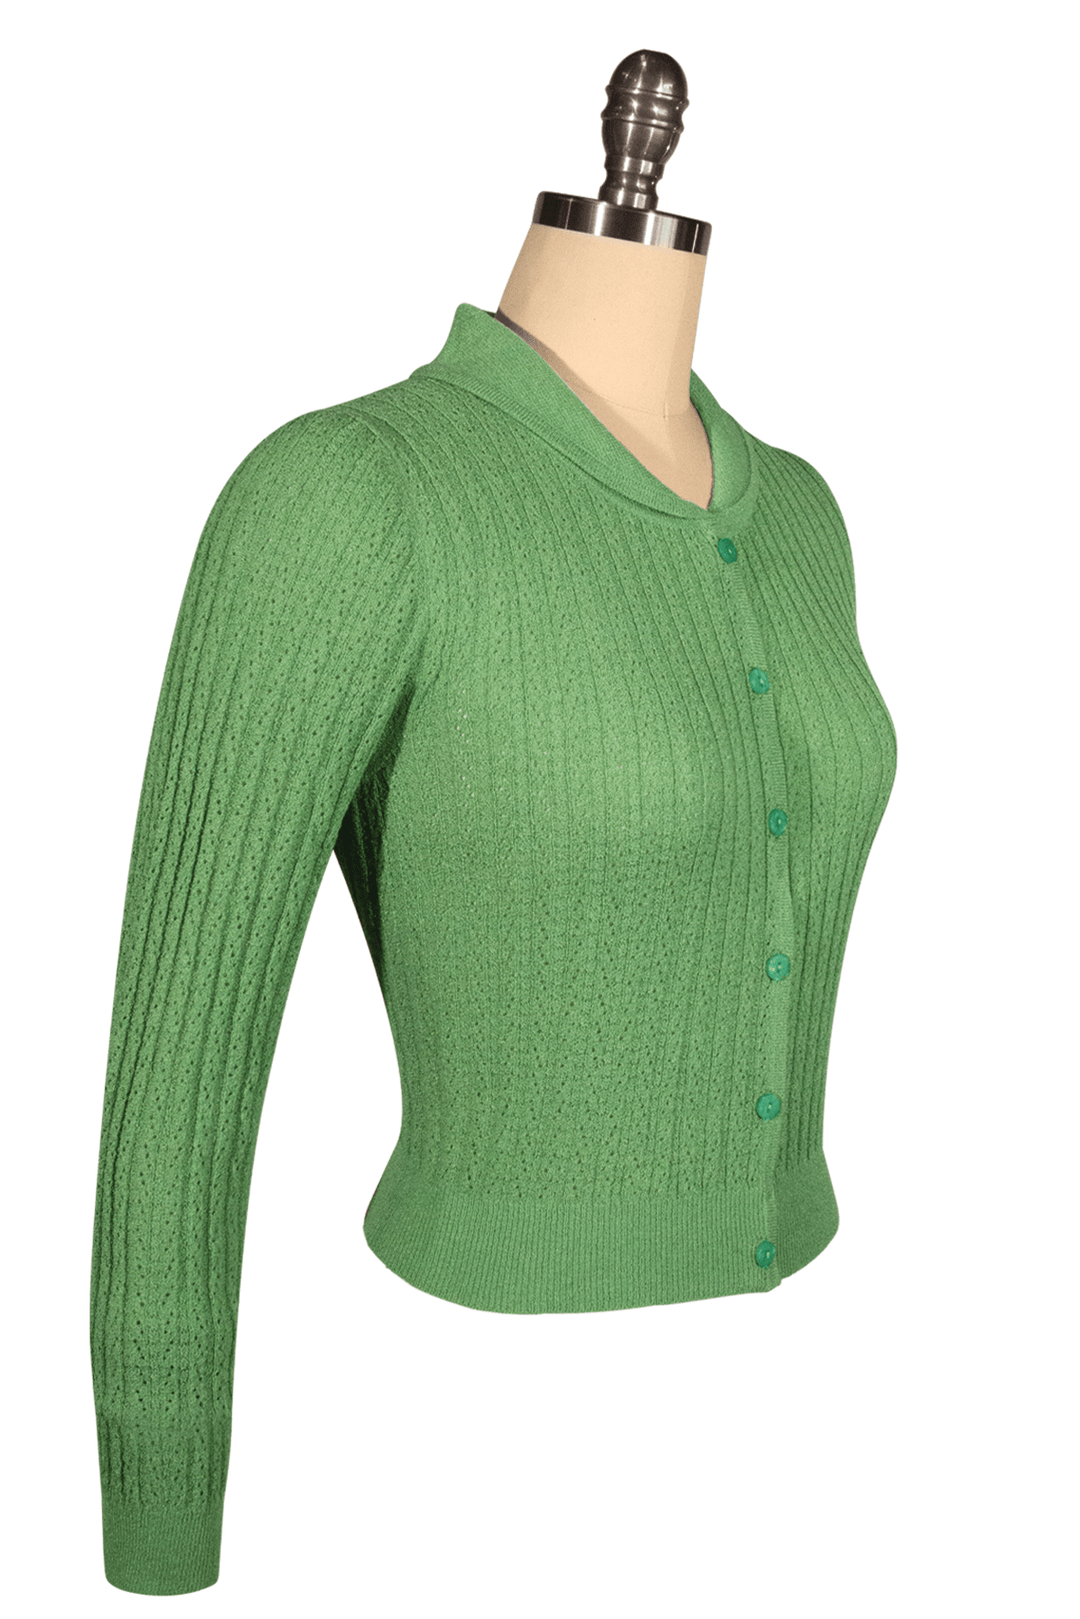 D'Amour Dickens Cardigan (Green) - Kitten D'Amour